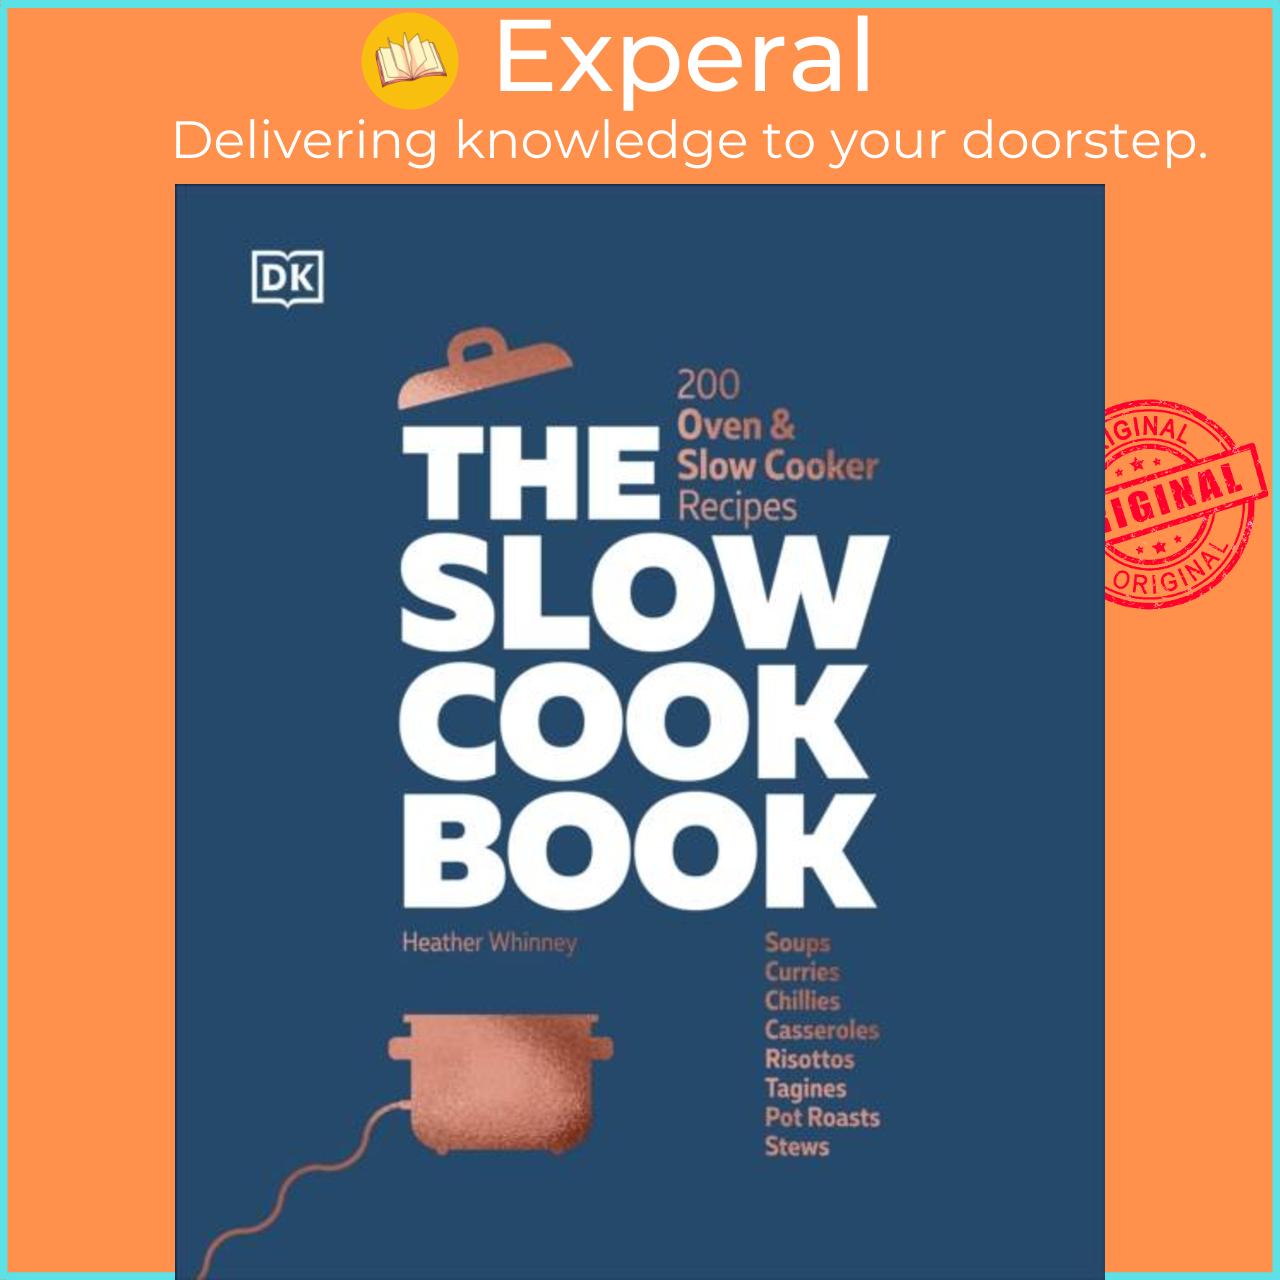 Sách - The Slow Cook Book - 200 Oven & Slow Cooker Recipes by DK (UK edition, hardcover)